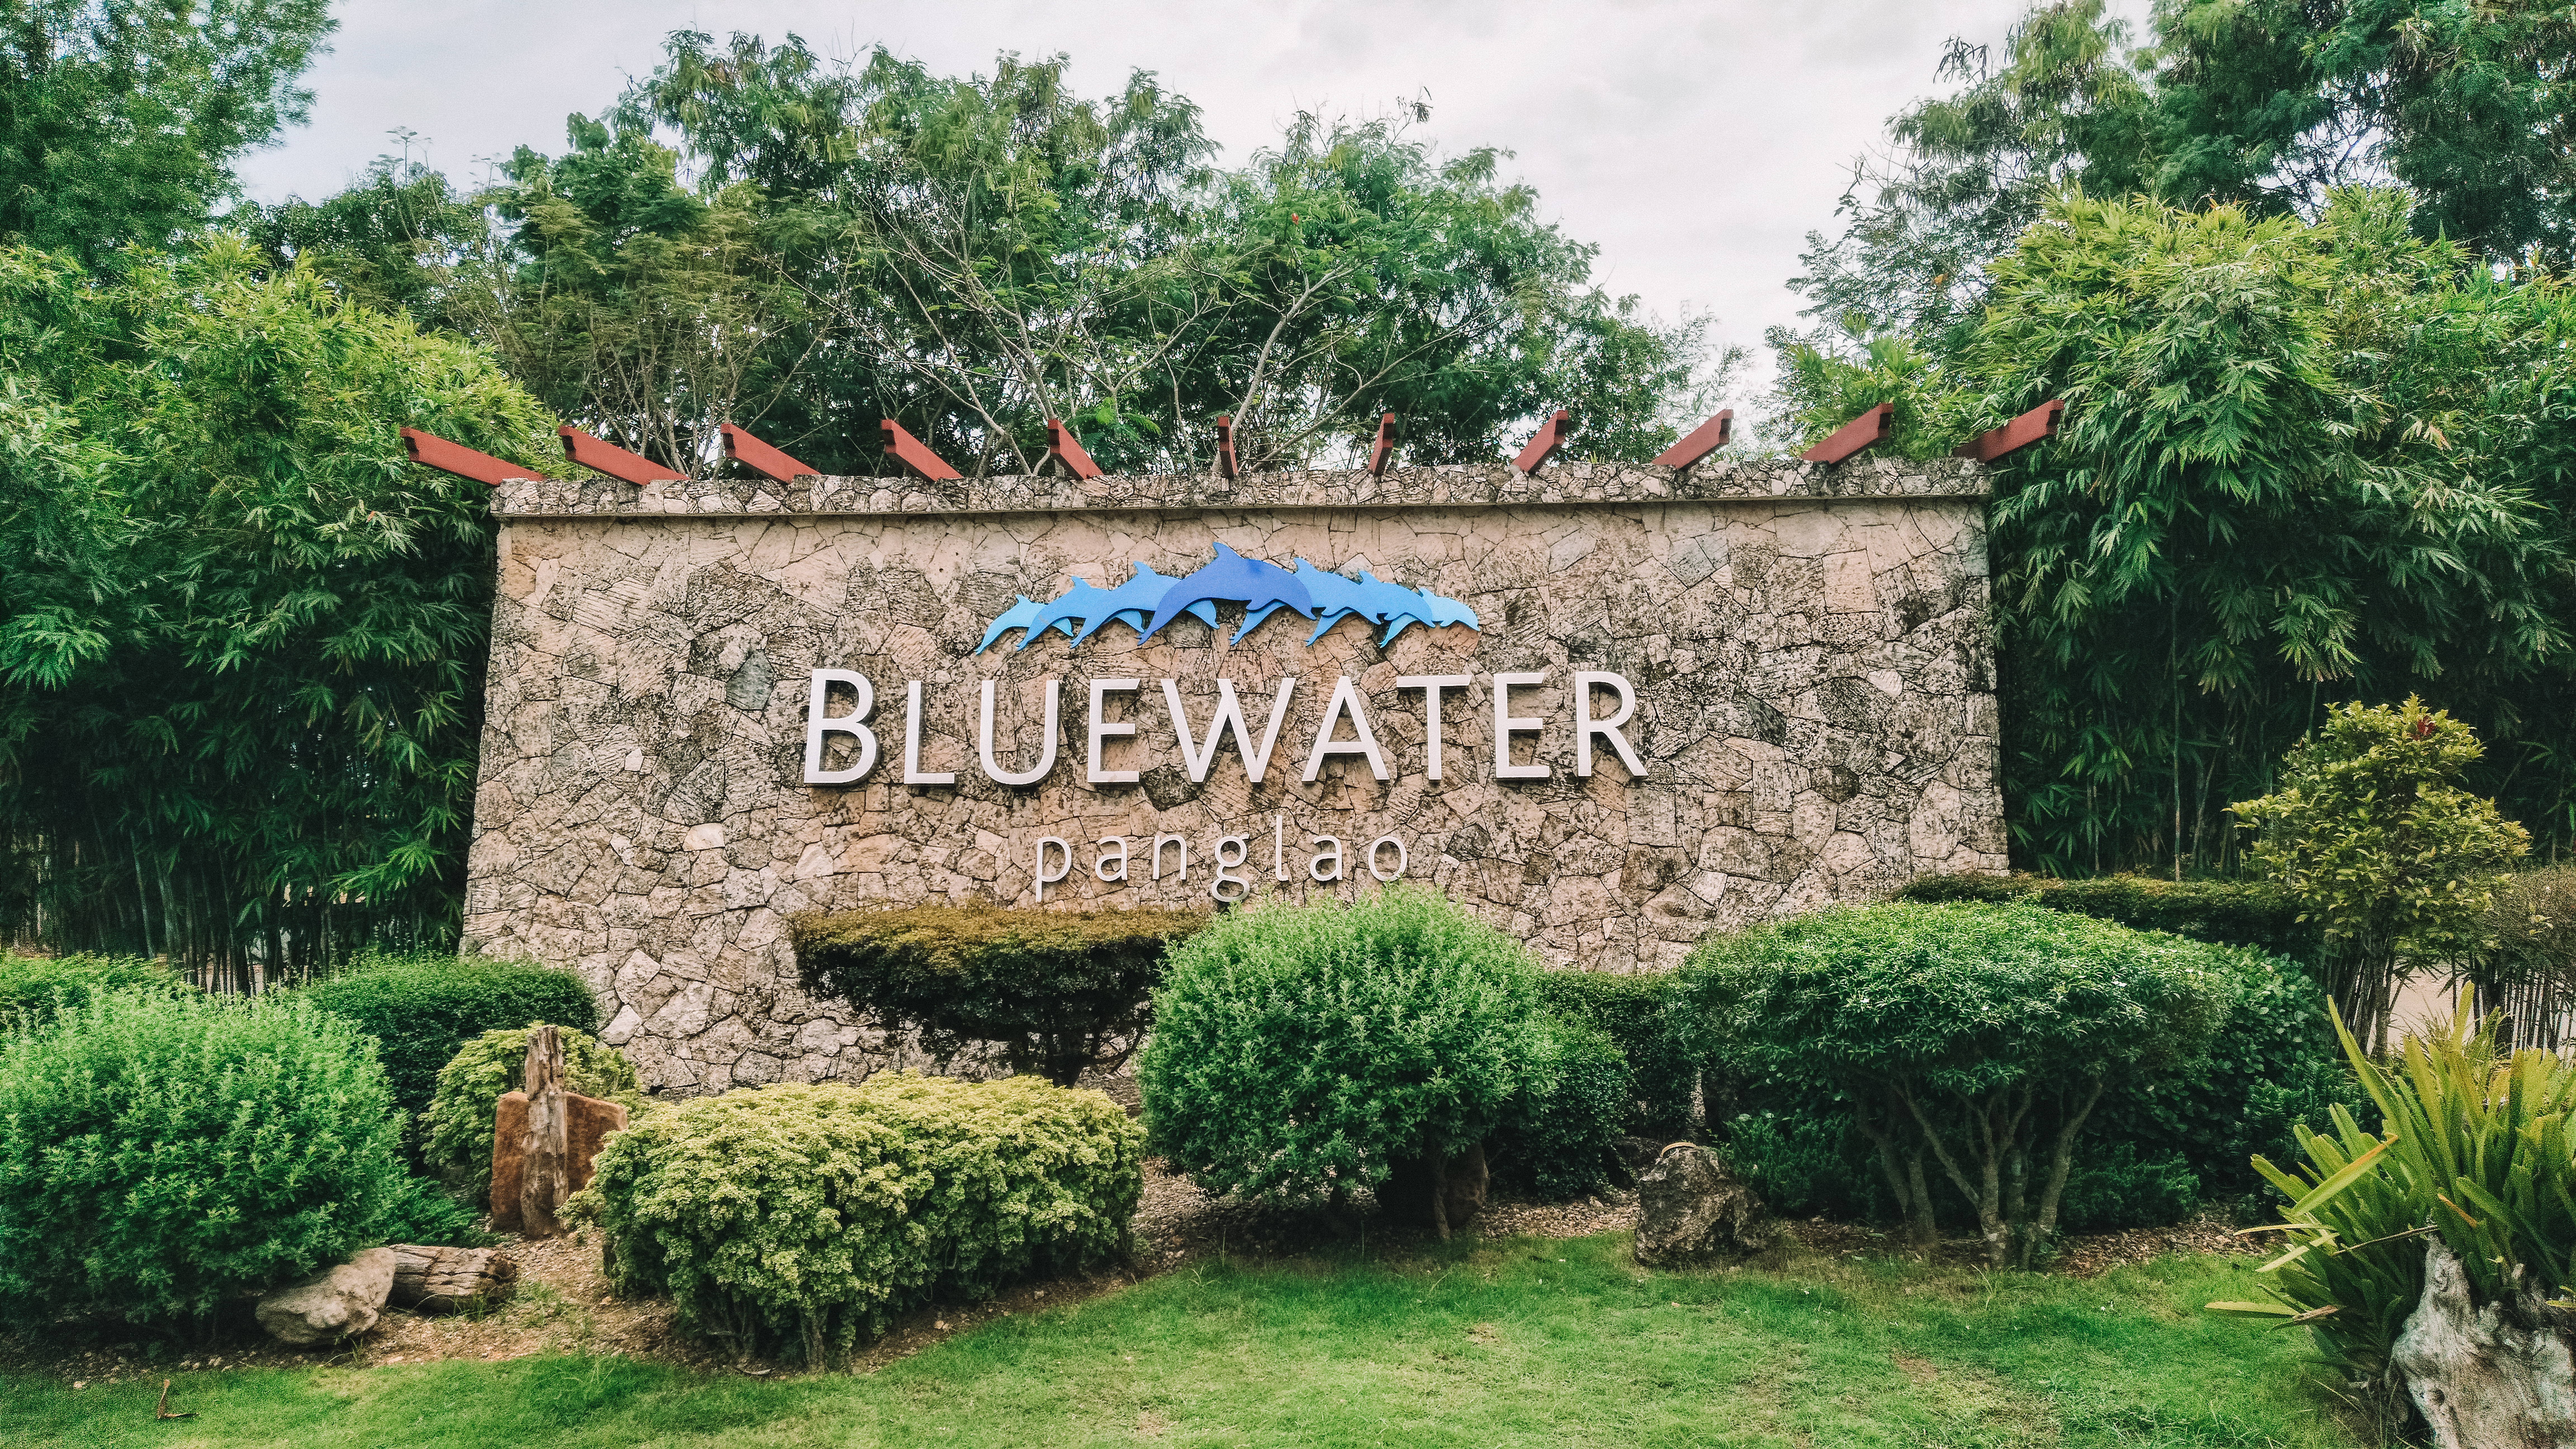 9 REASONS WHY BLUEWATER PANGLAO BEACH RESORT IS YOUR BEST CHOICE OF HOTEL IN BOHOL